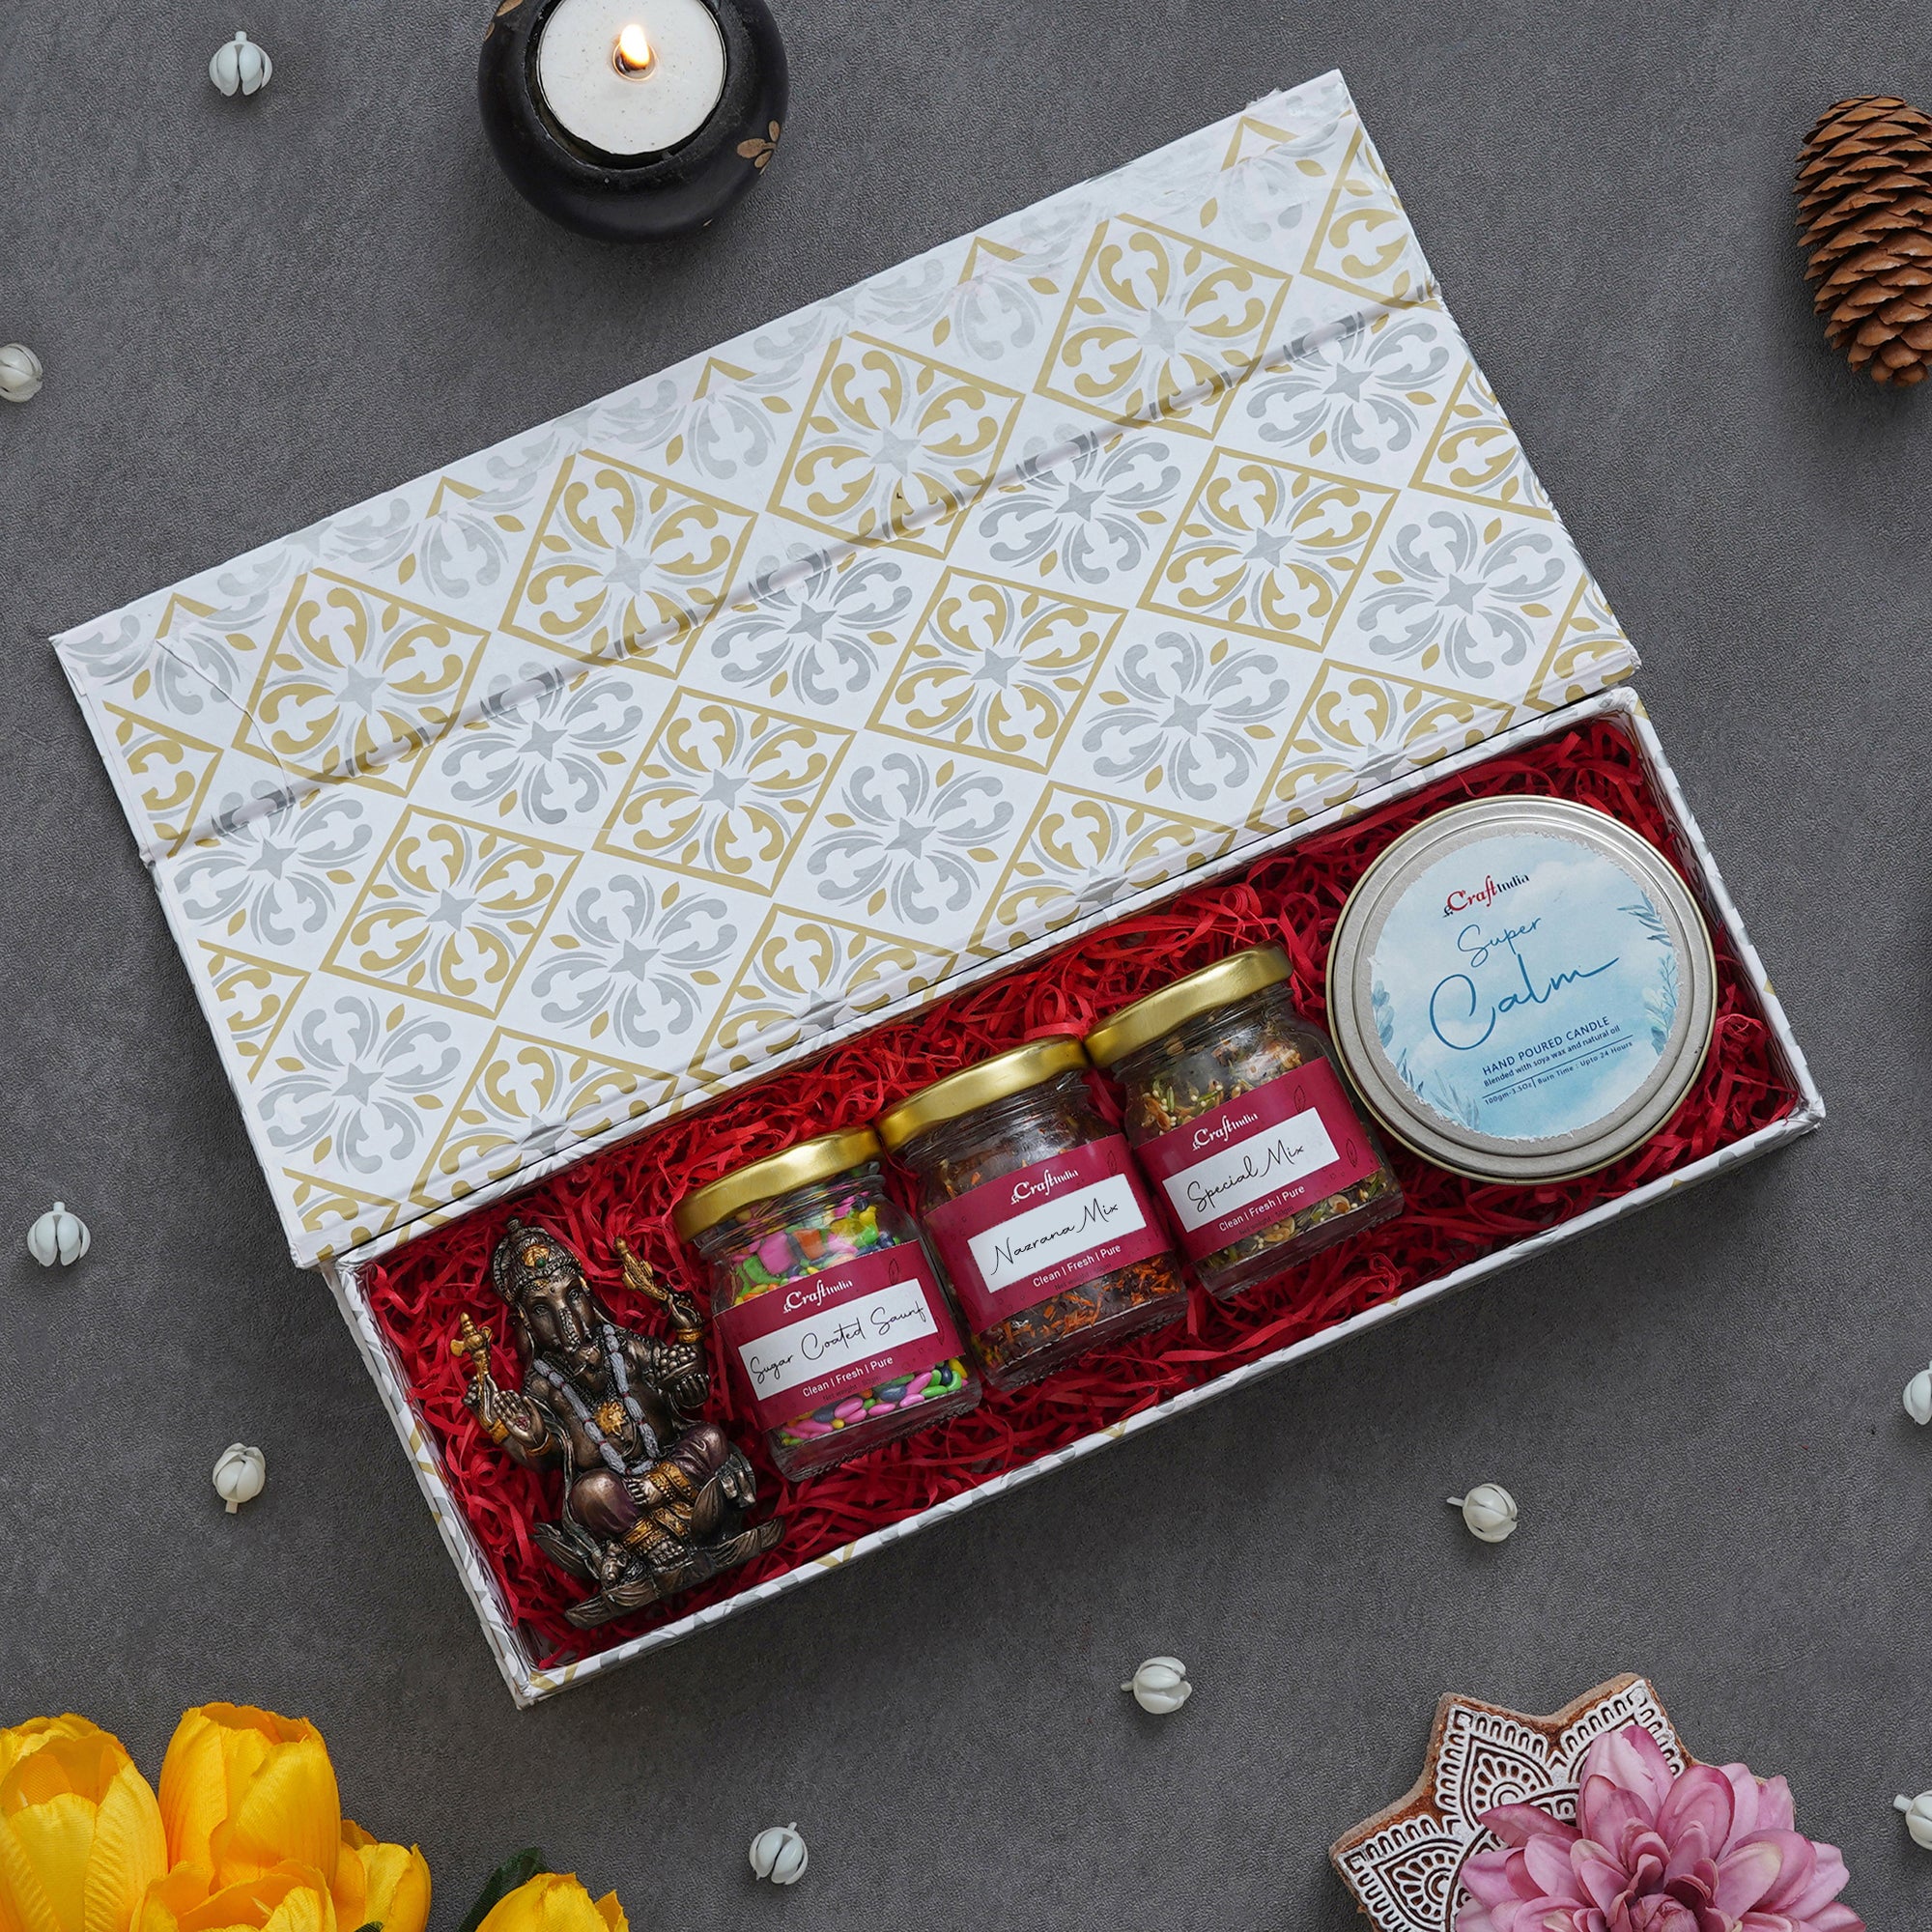 eCraftIndia The Marvellous Gift Box - Polyresin Chaturbhuj Lord Ganesha Idol, 3 Jars of Sugar Coated Saunf, Nazarana Mix, Special Mix Mukhwas (30gms Each), Super Calm Hand Poured Soya Wax Candle